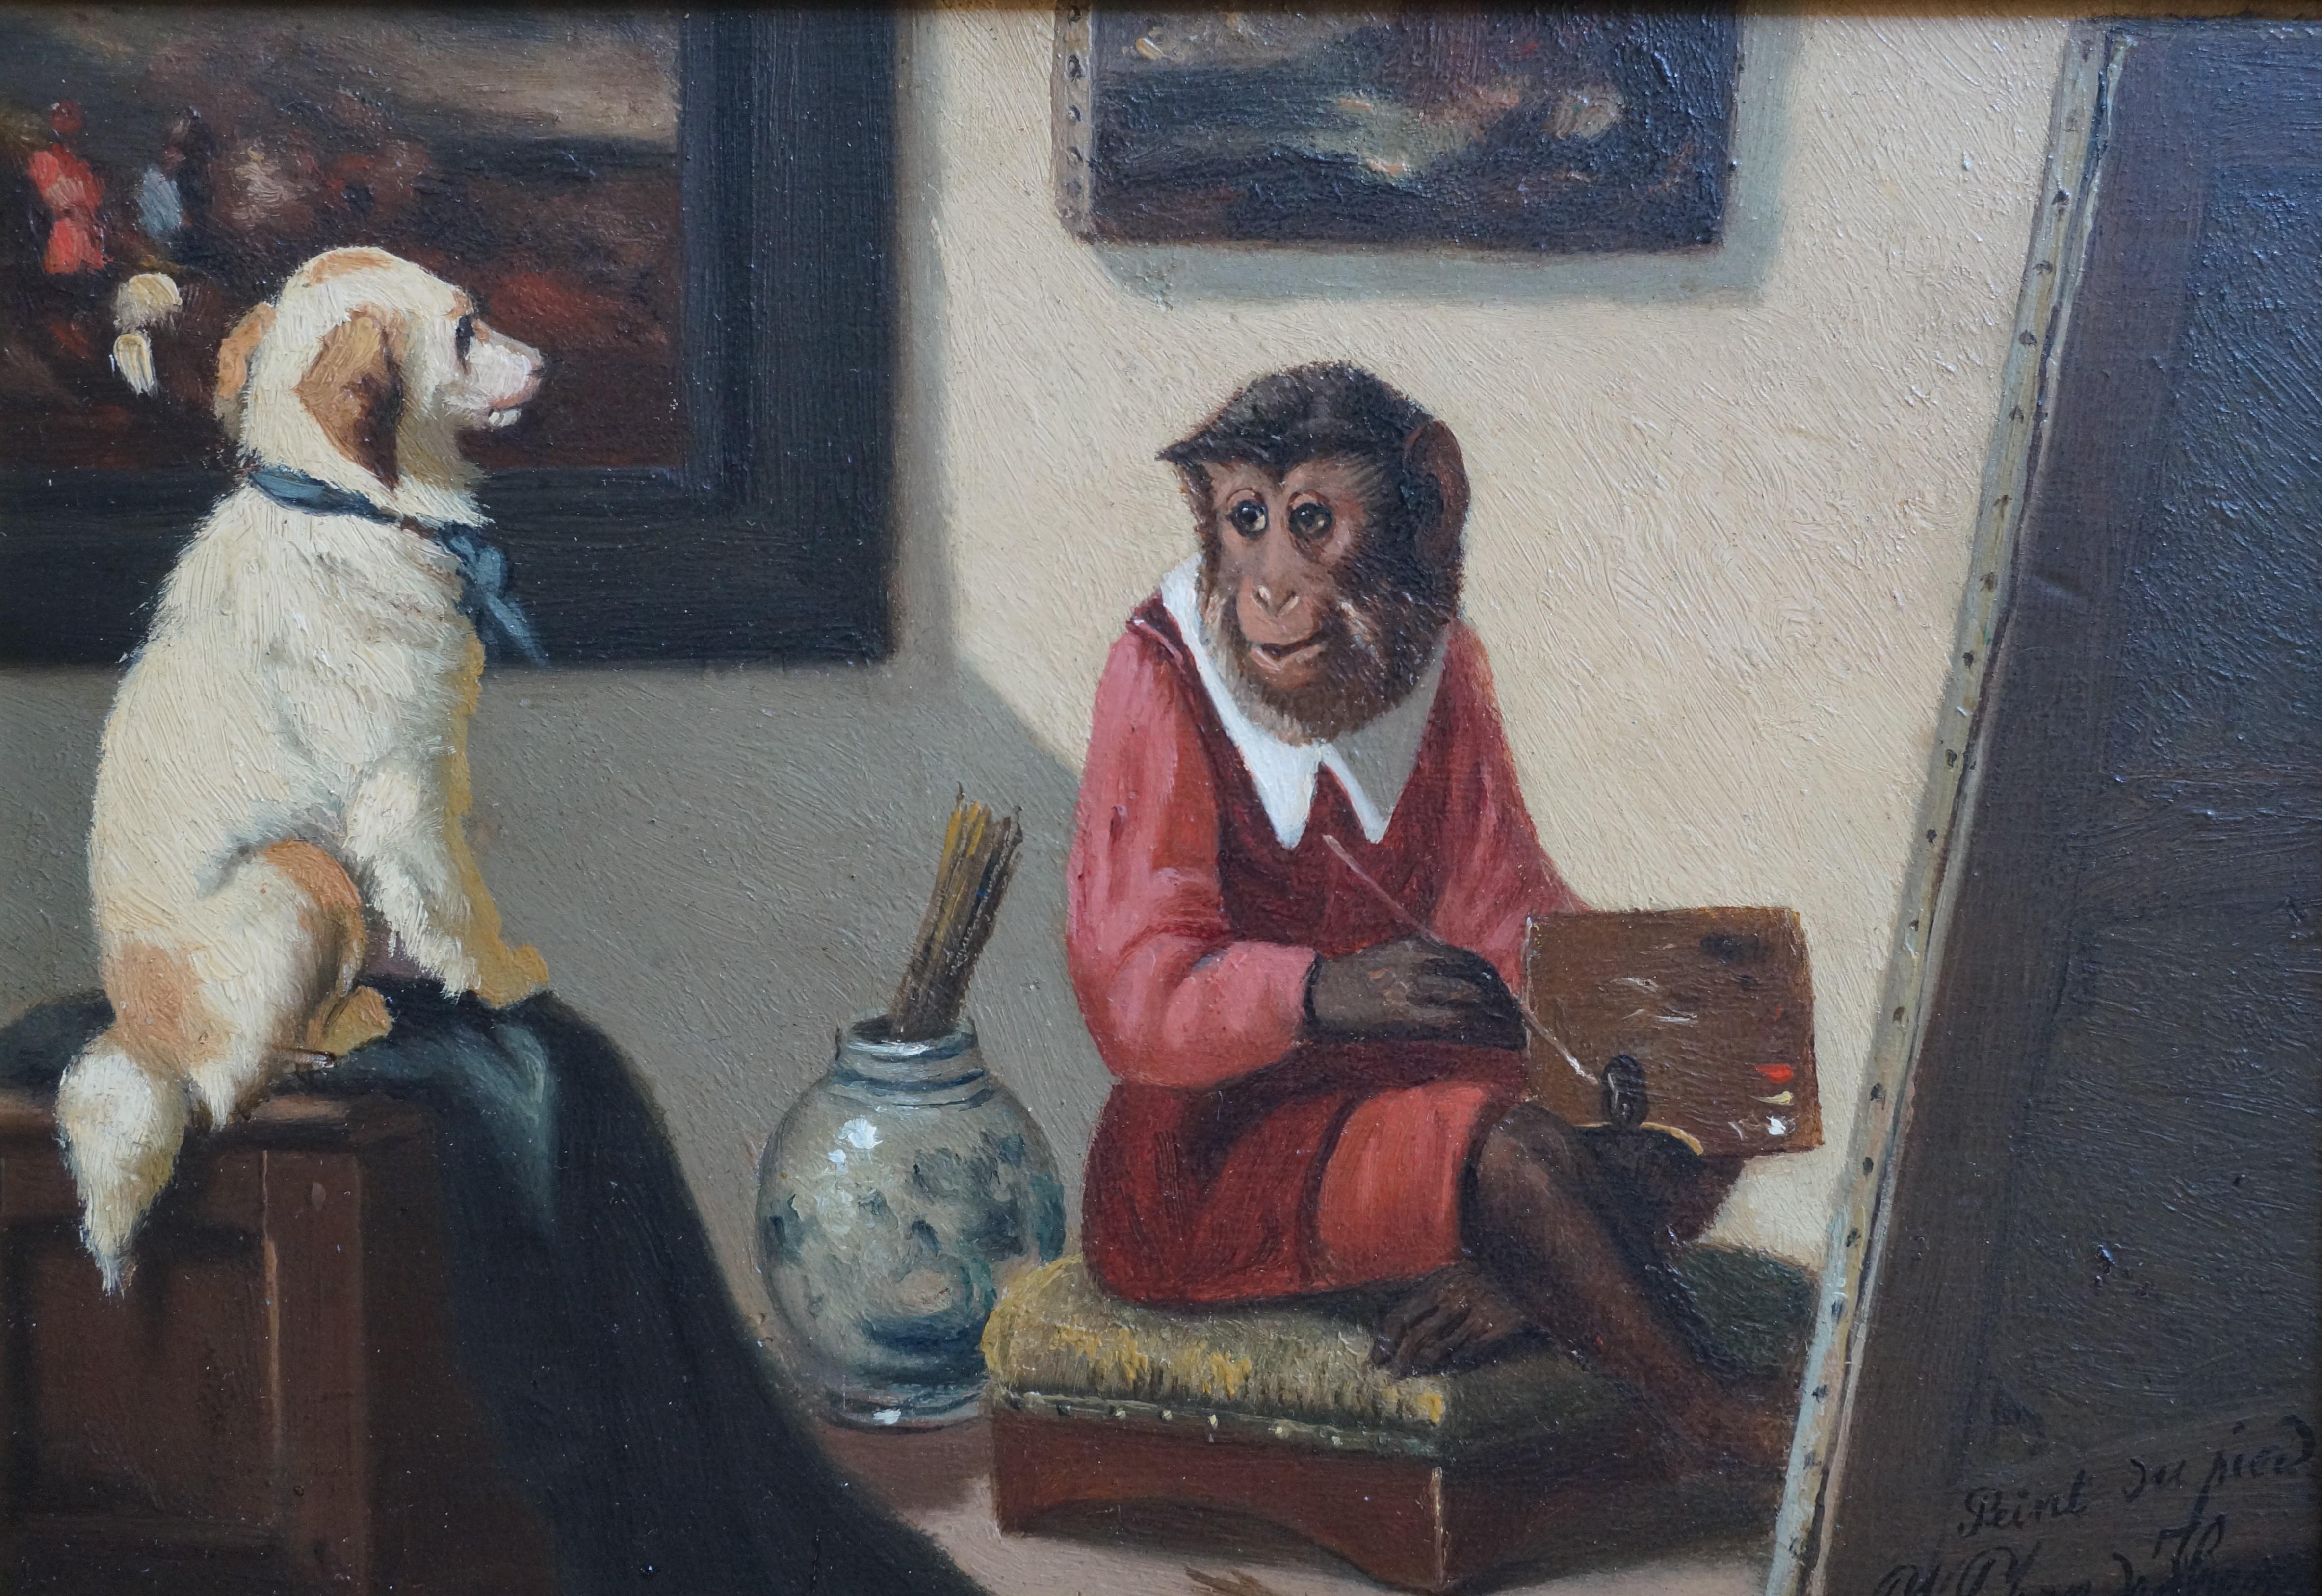  Singerie, Monkey painting a dog, ca. 1900, oil painting, painted with foot - Painting by V. J. de Henau